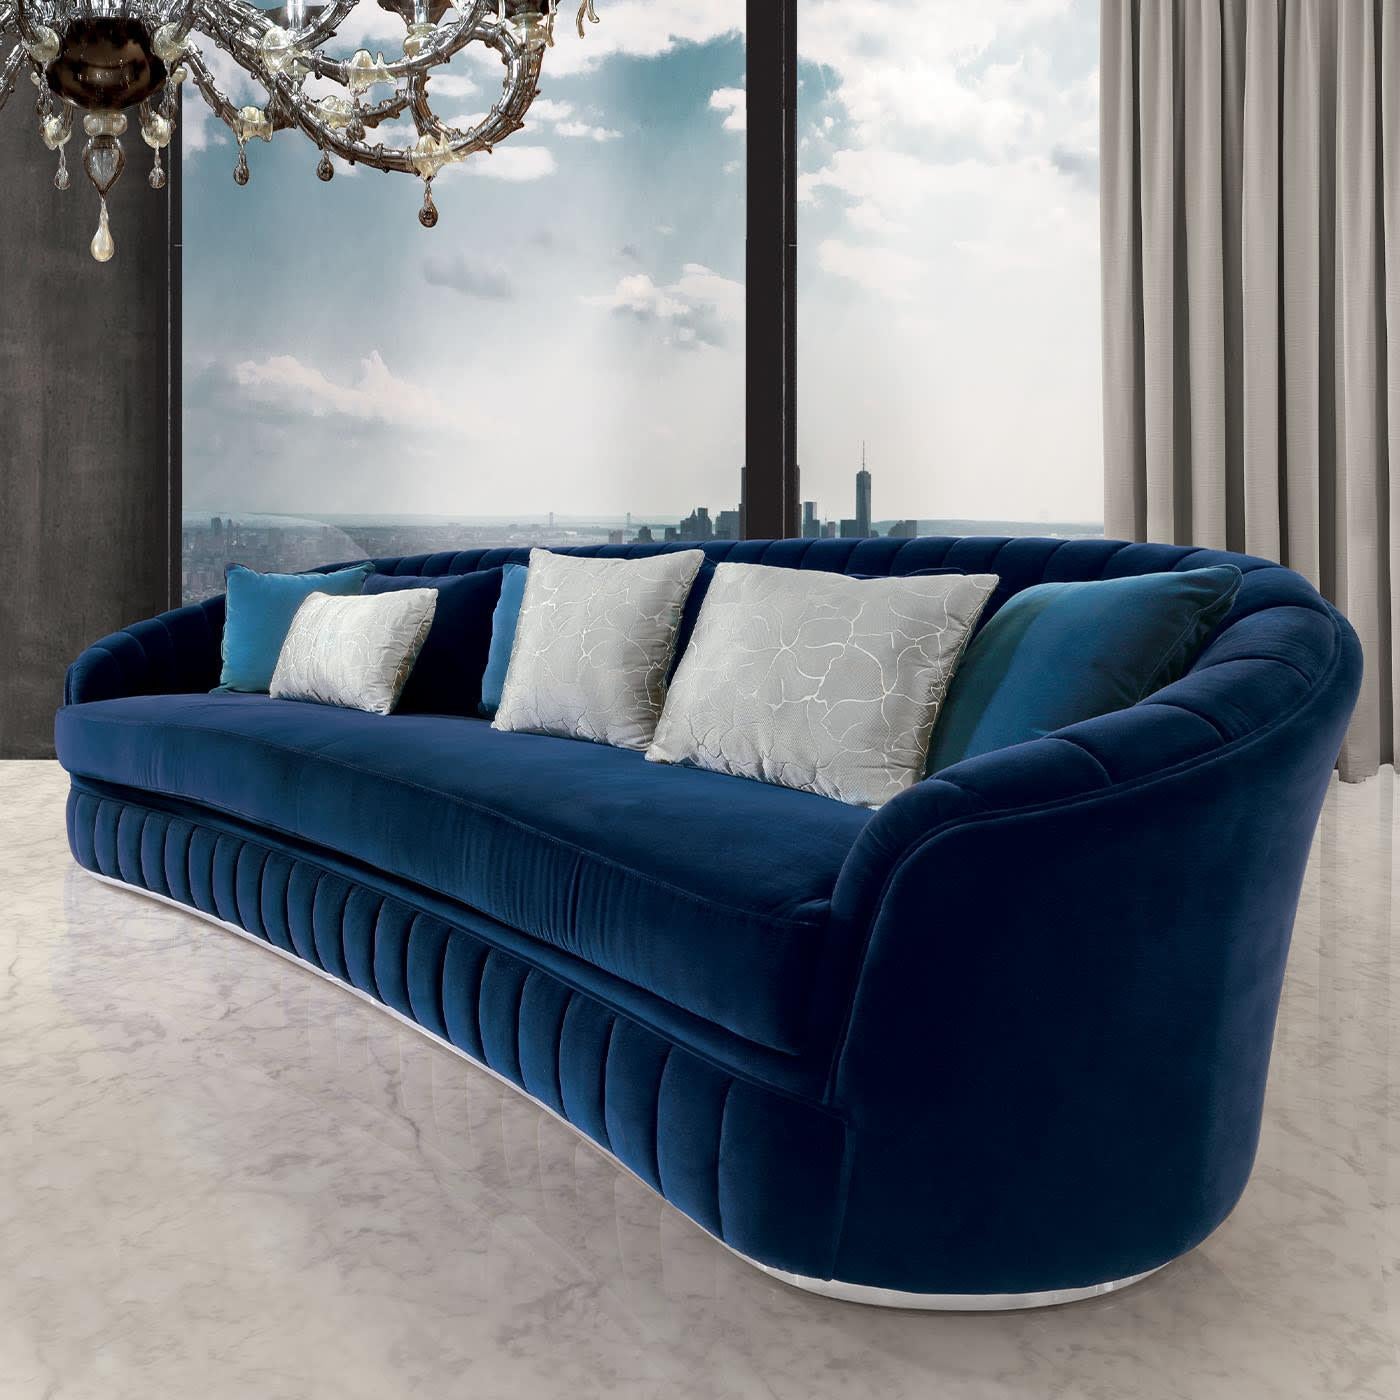 The generous size and plush character of this sofa suggests its placement inside wide interior decors ready to welcome refined guests. Featuring a generous memory foam padding enveloped by a precious blue velvet upholstery, it reveals its welcoming